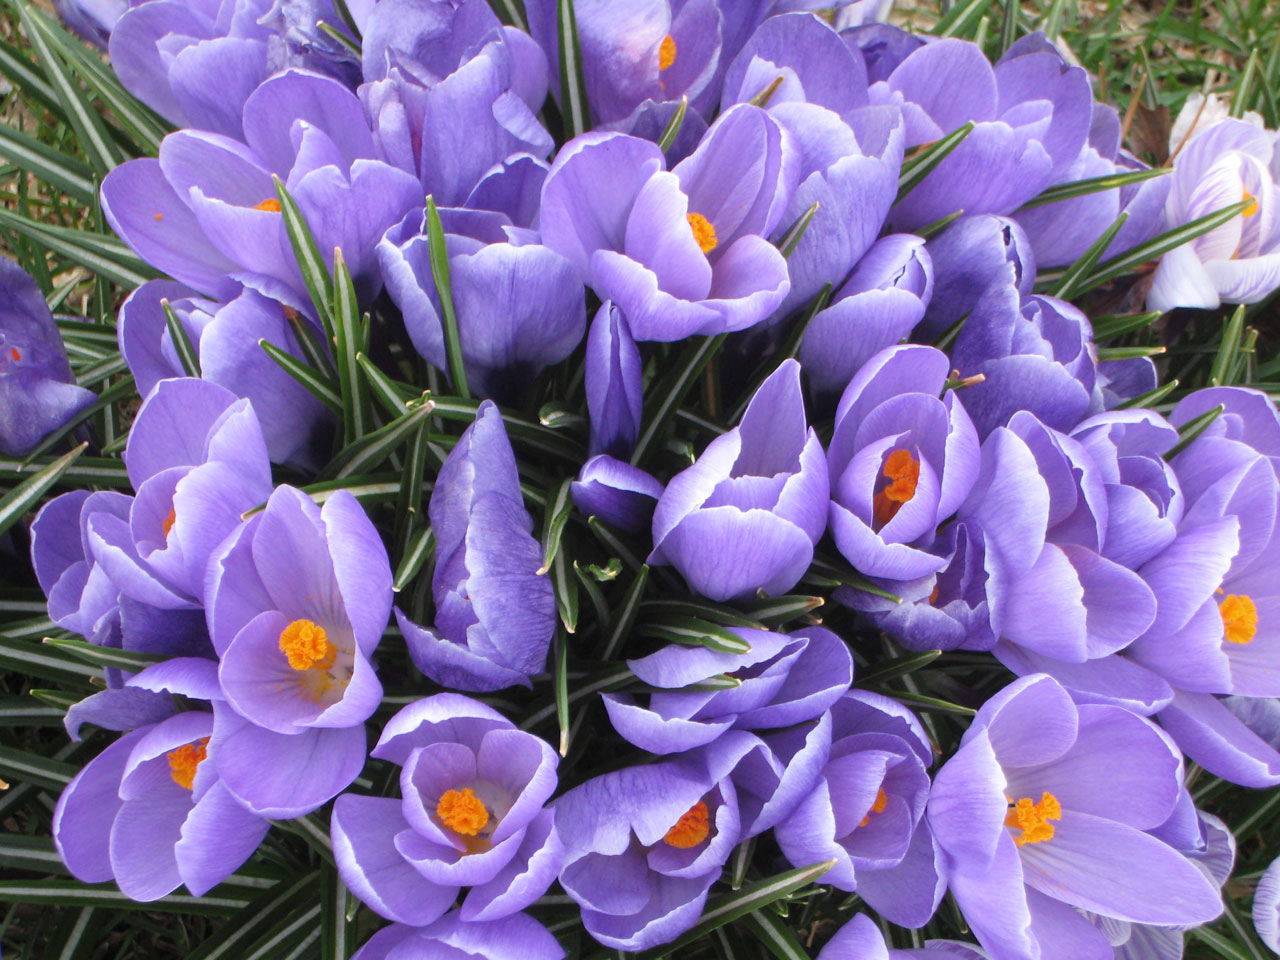 Small group of purple crocus blooming in early spring